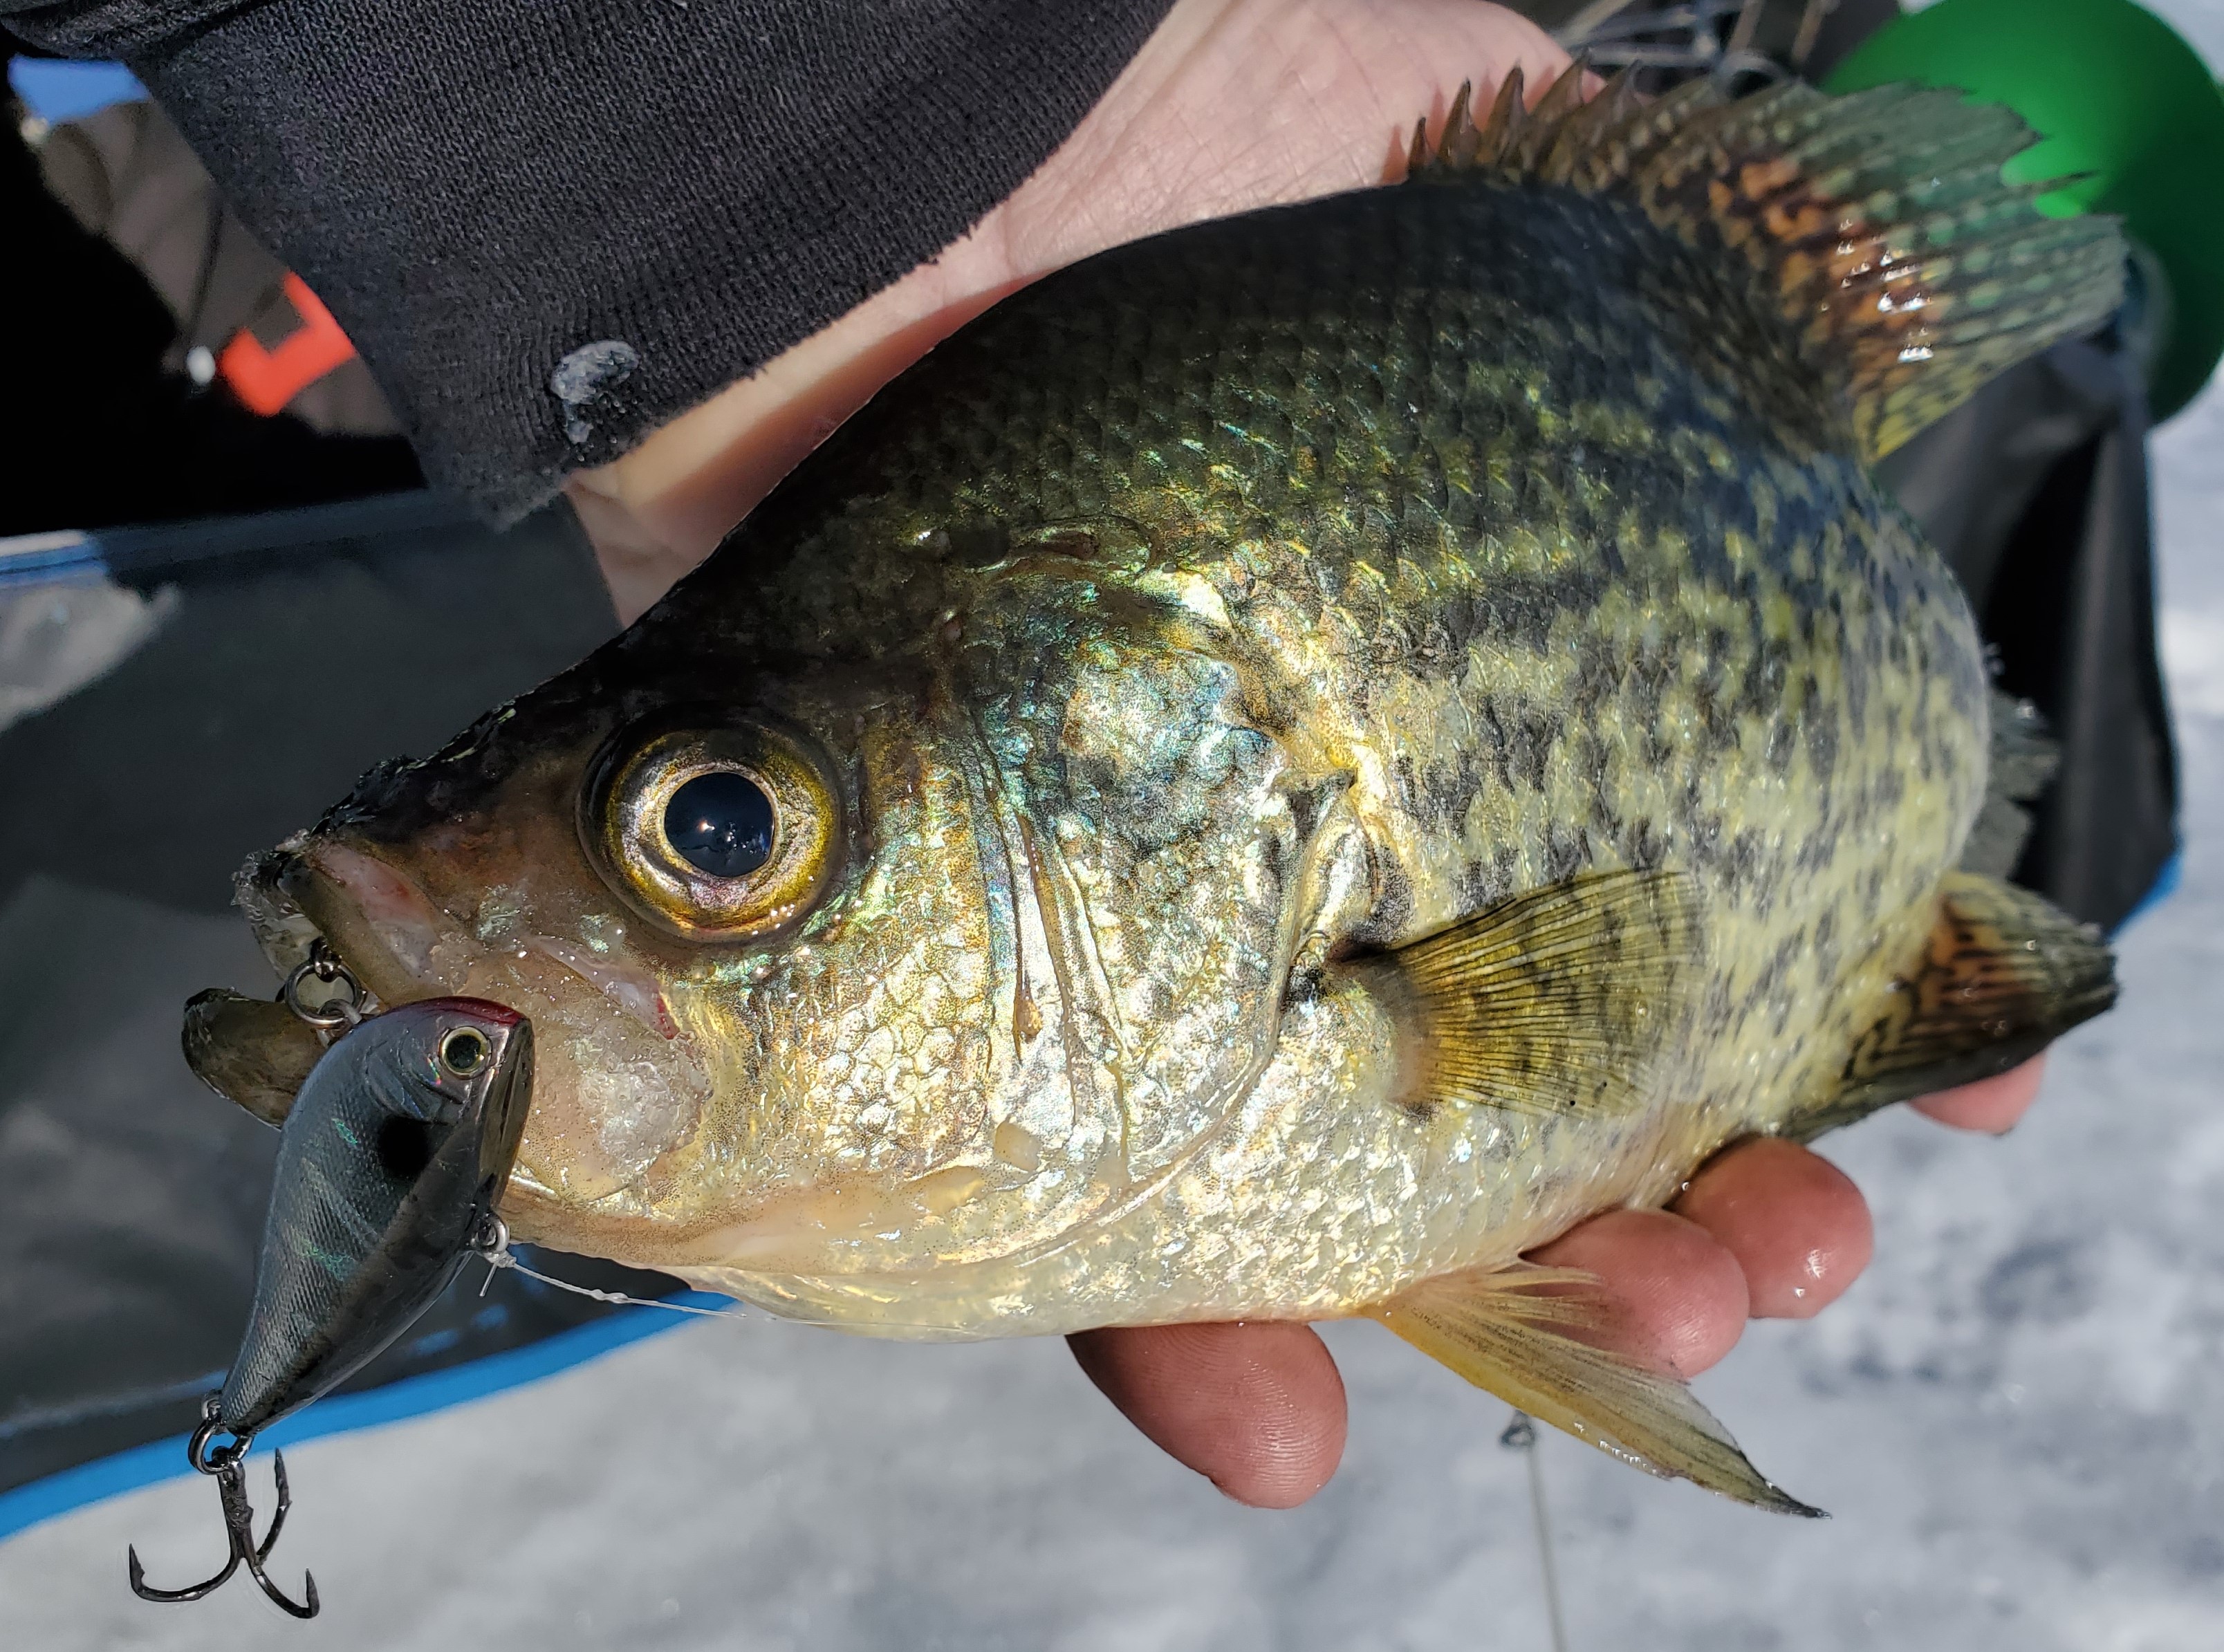 How to fillet and pan-dress crappie, bluegills and other panfish